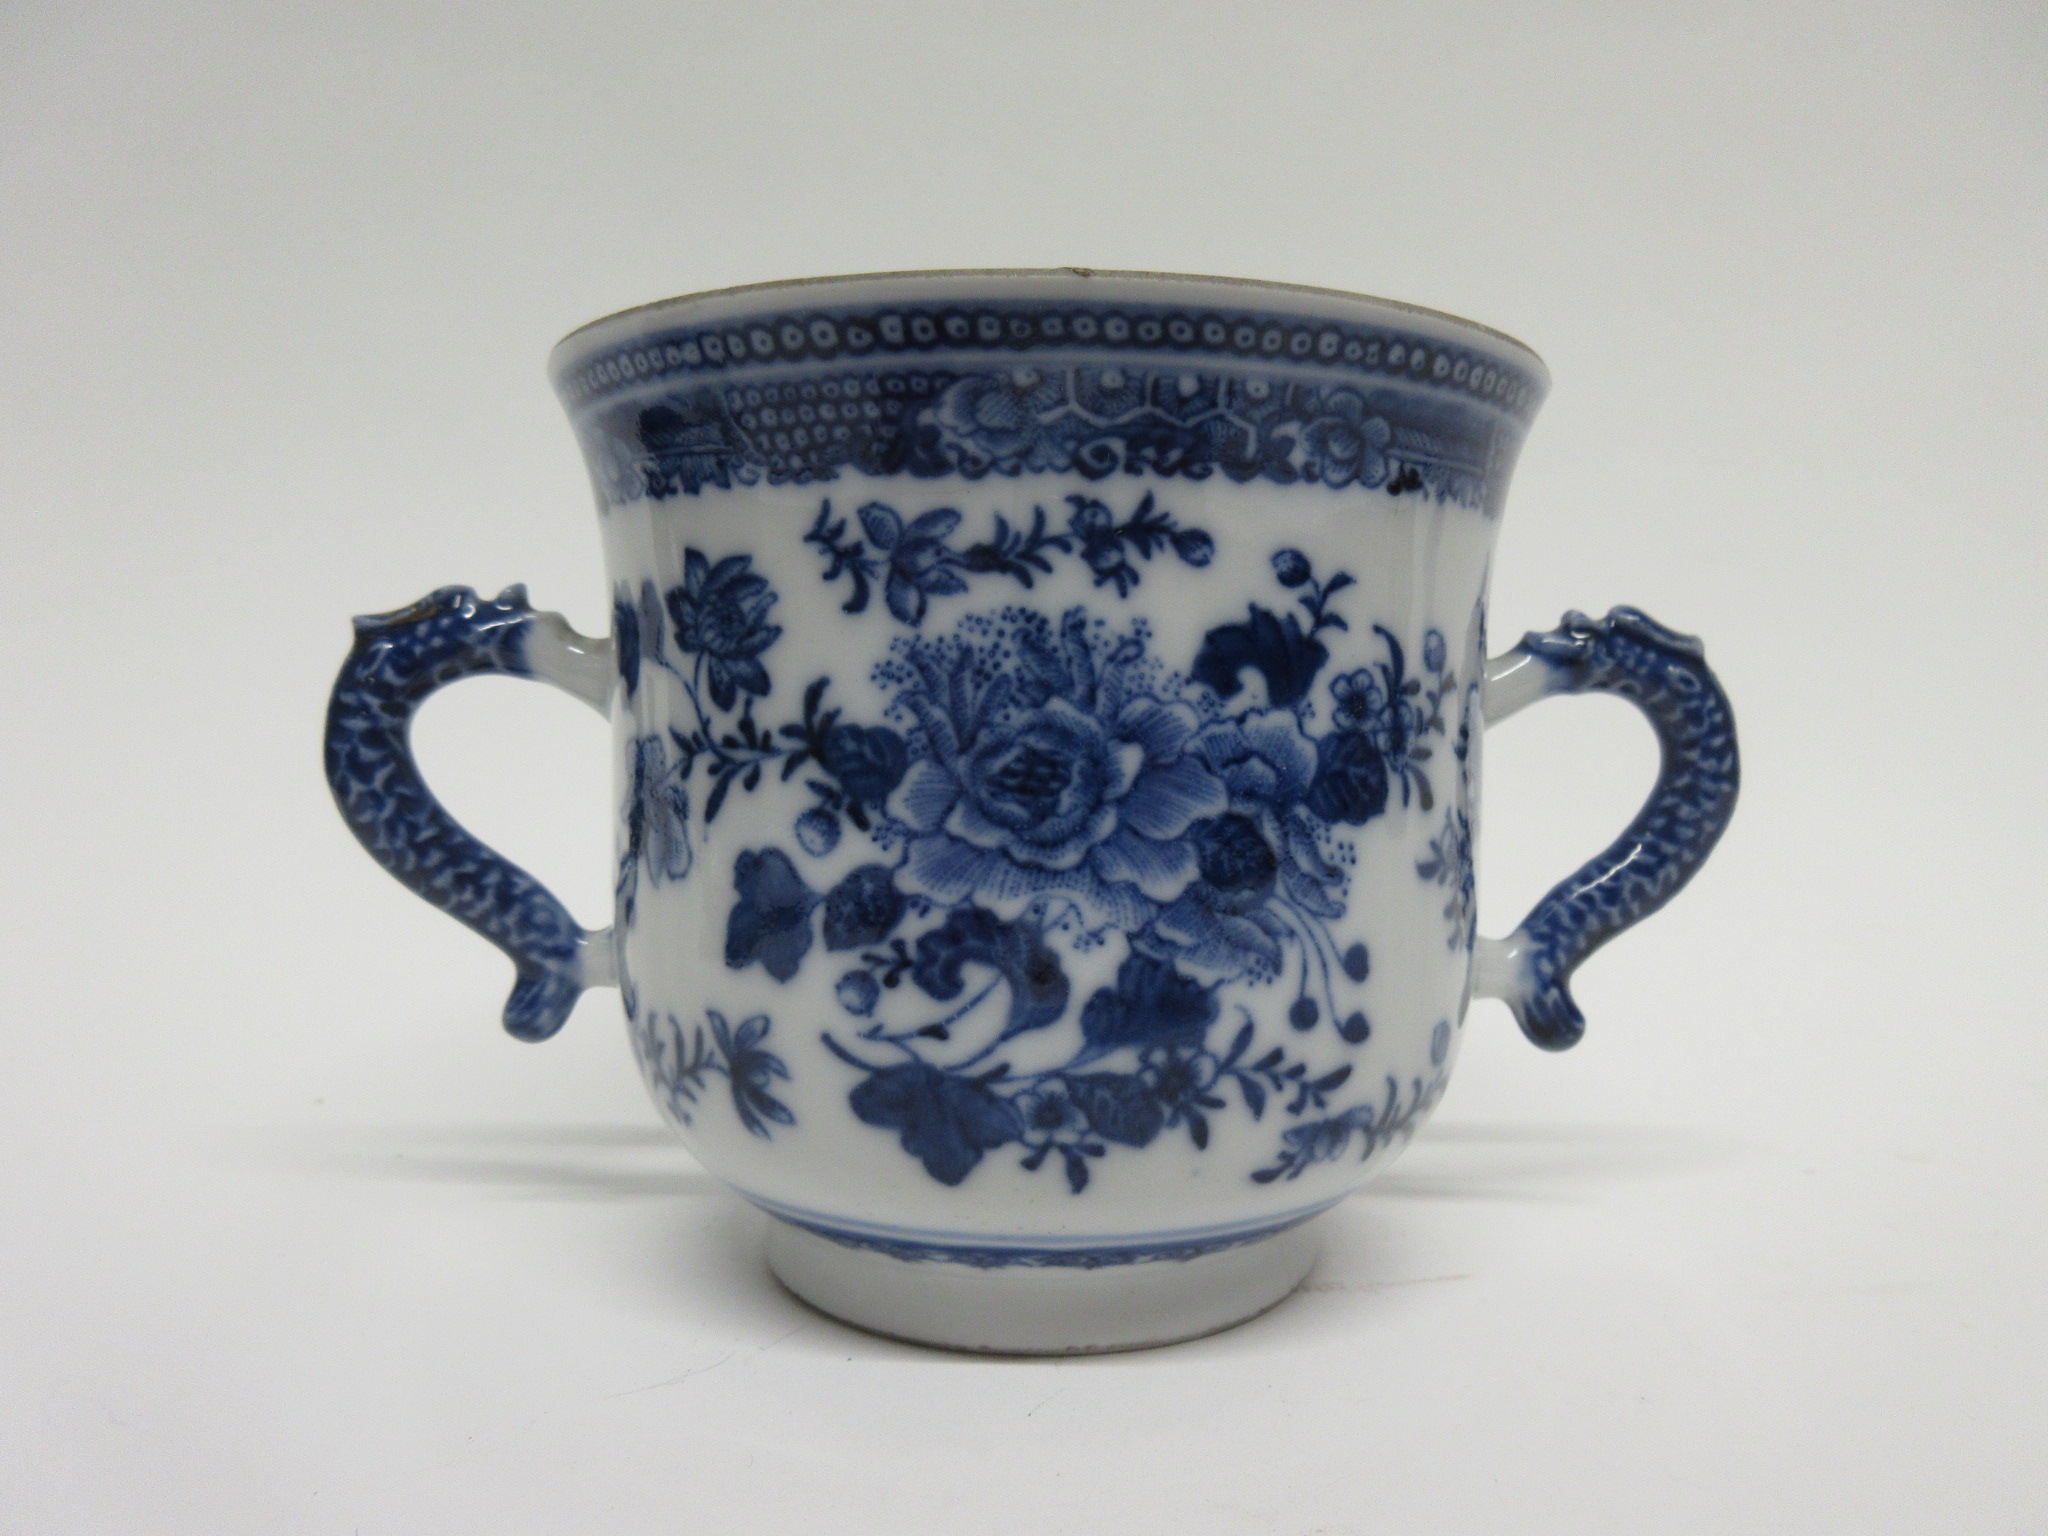 Late 18th/early 19th century Chinese porcelain blue and white jar and associated cover, the jar with - Image 4 of 4